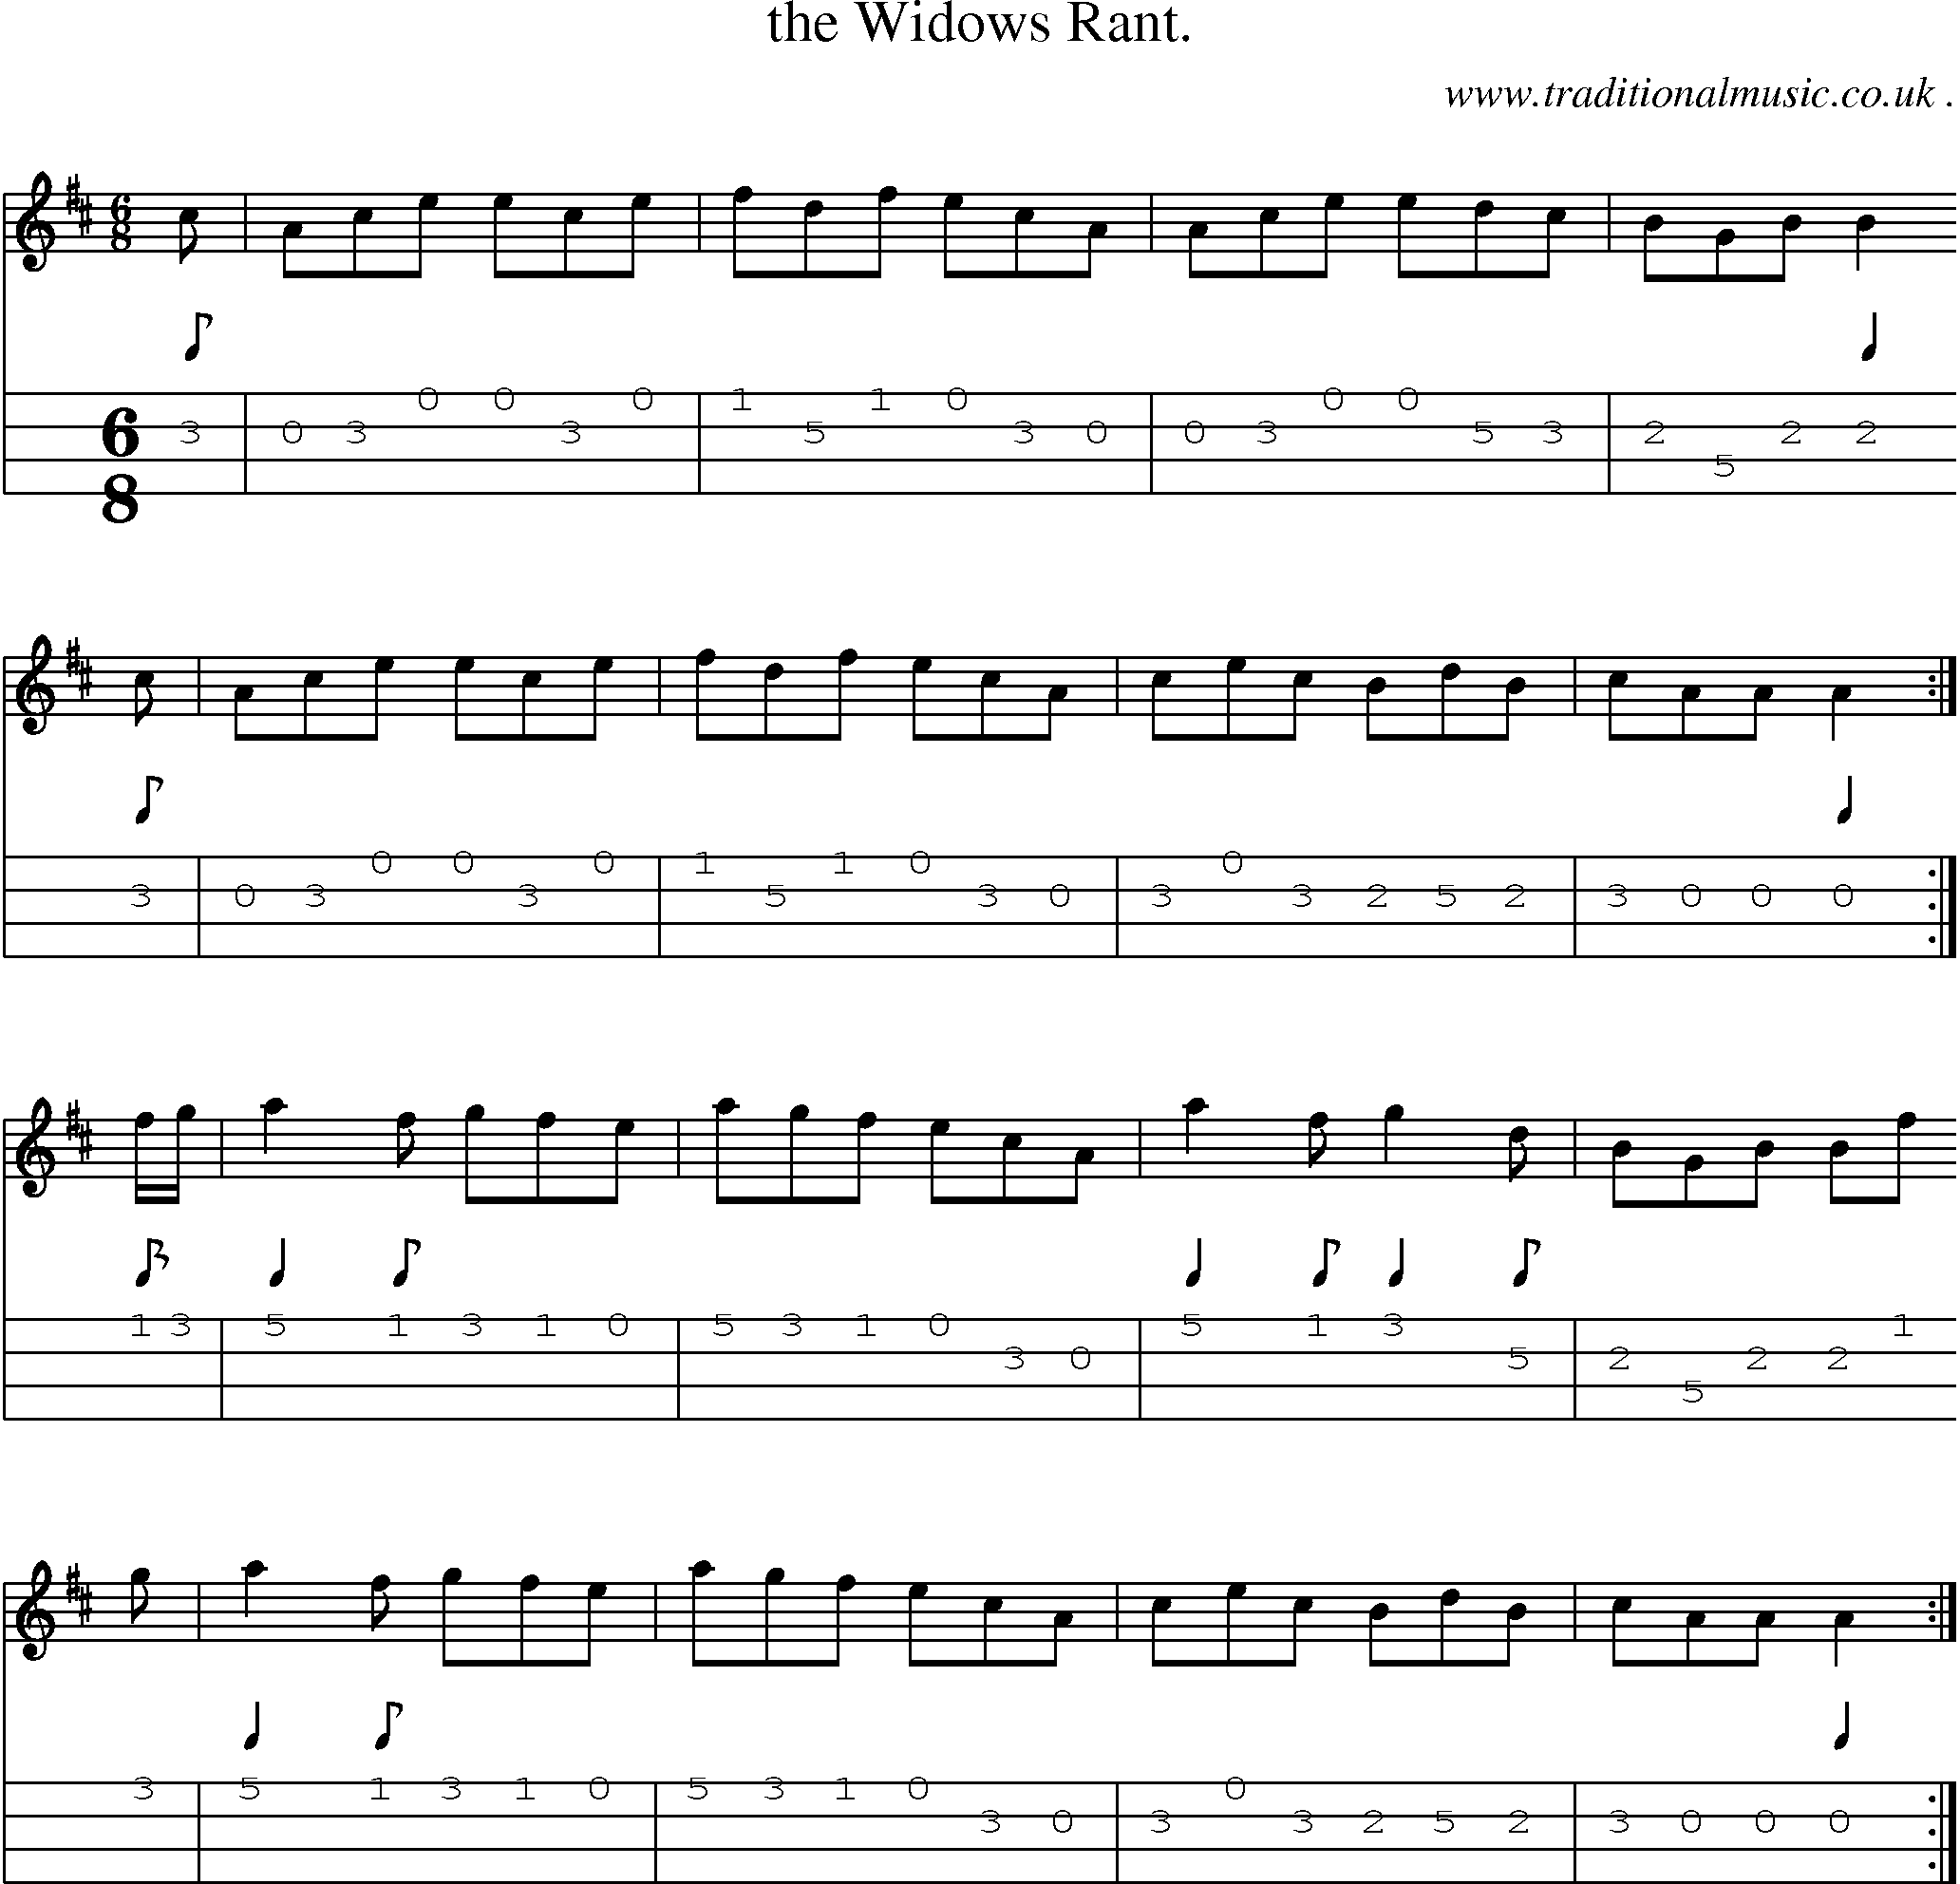 Sheet-Music and Mandolin Tabs for The Widows Rant